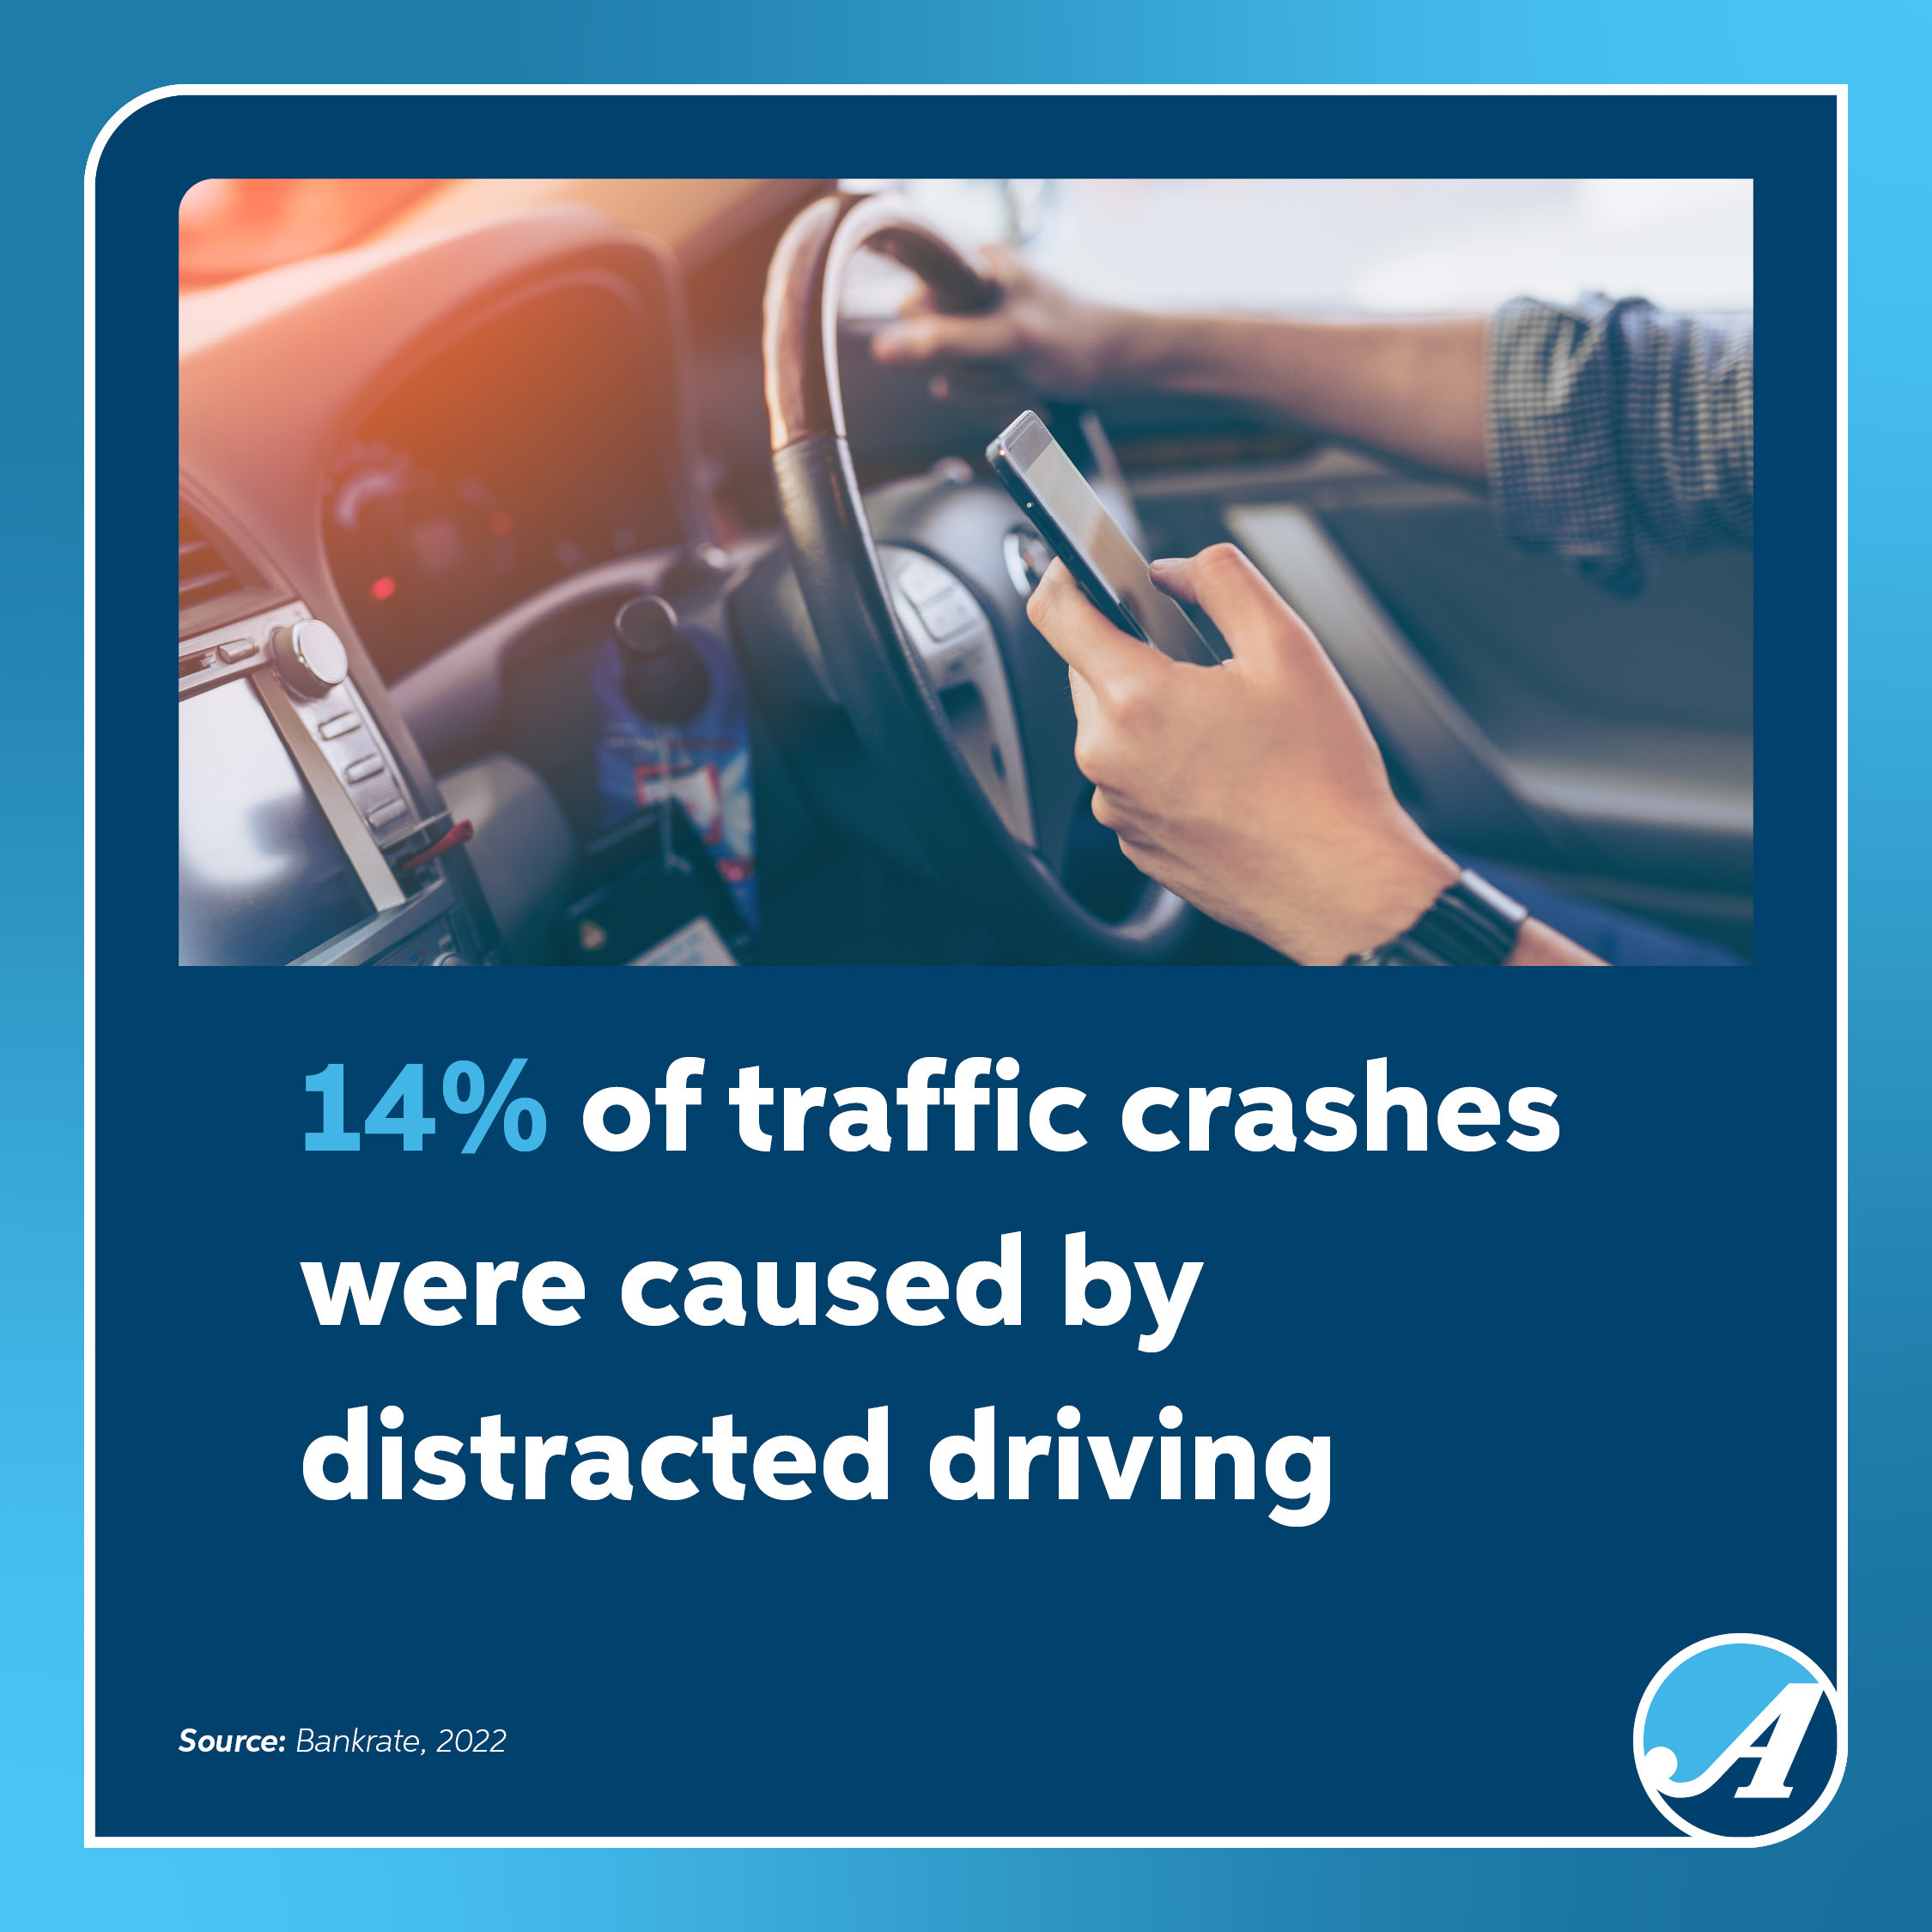 distracted driving image